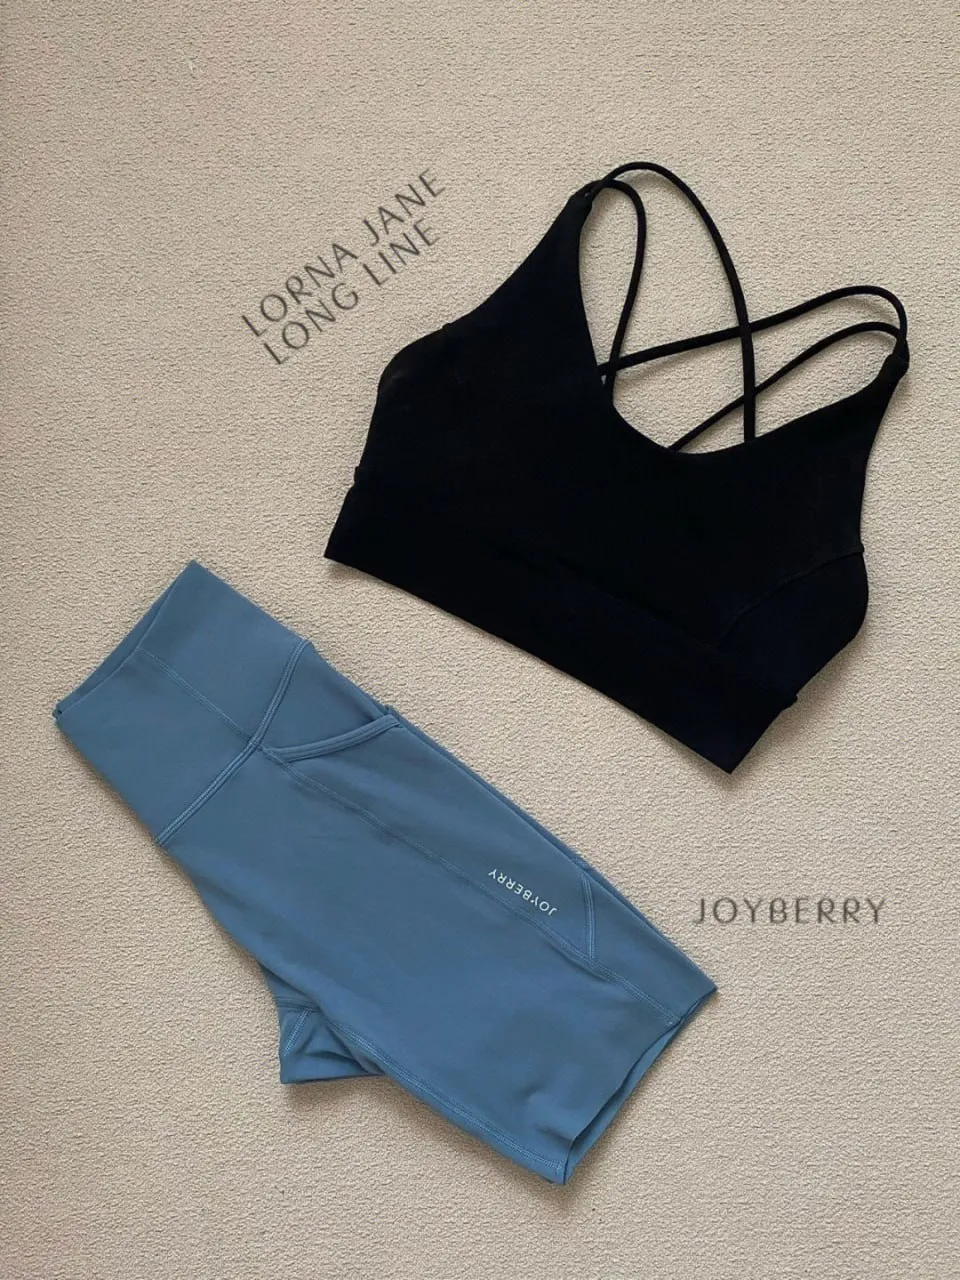 Lorna Jane Womens Luxe Athleisure Active Pants Neutral XL